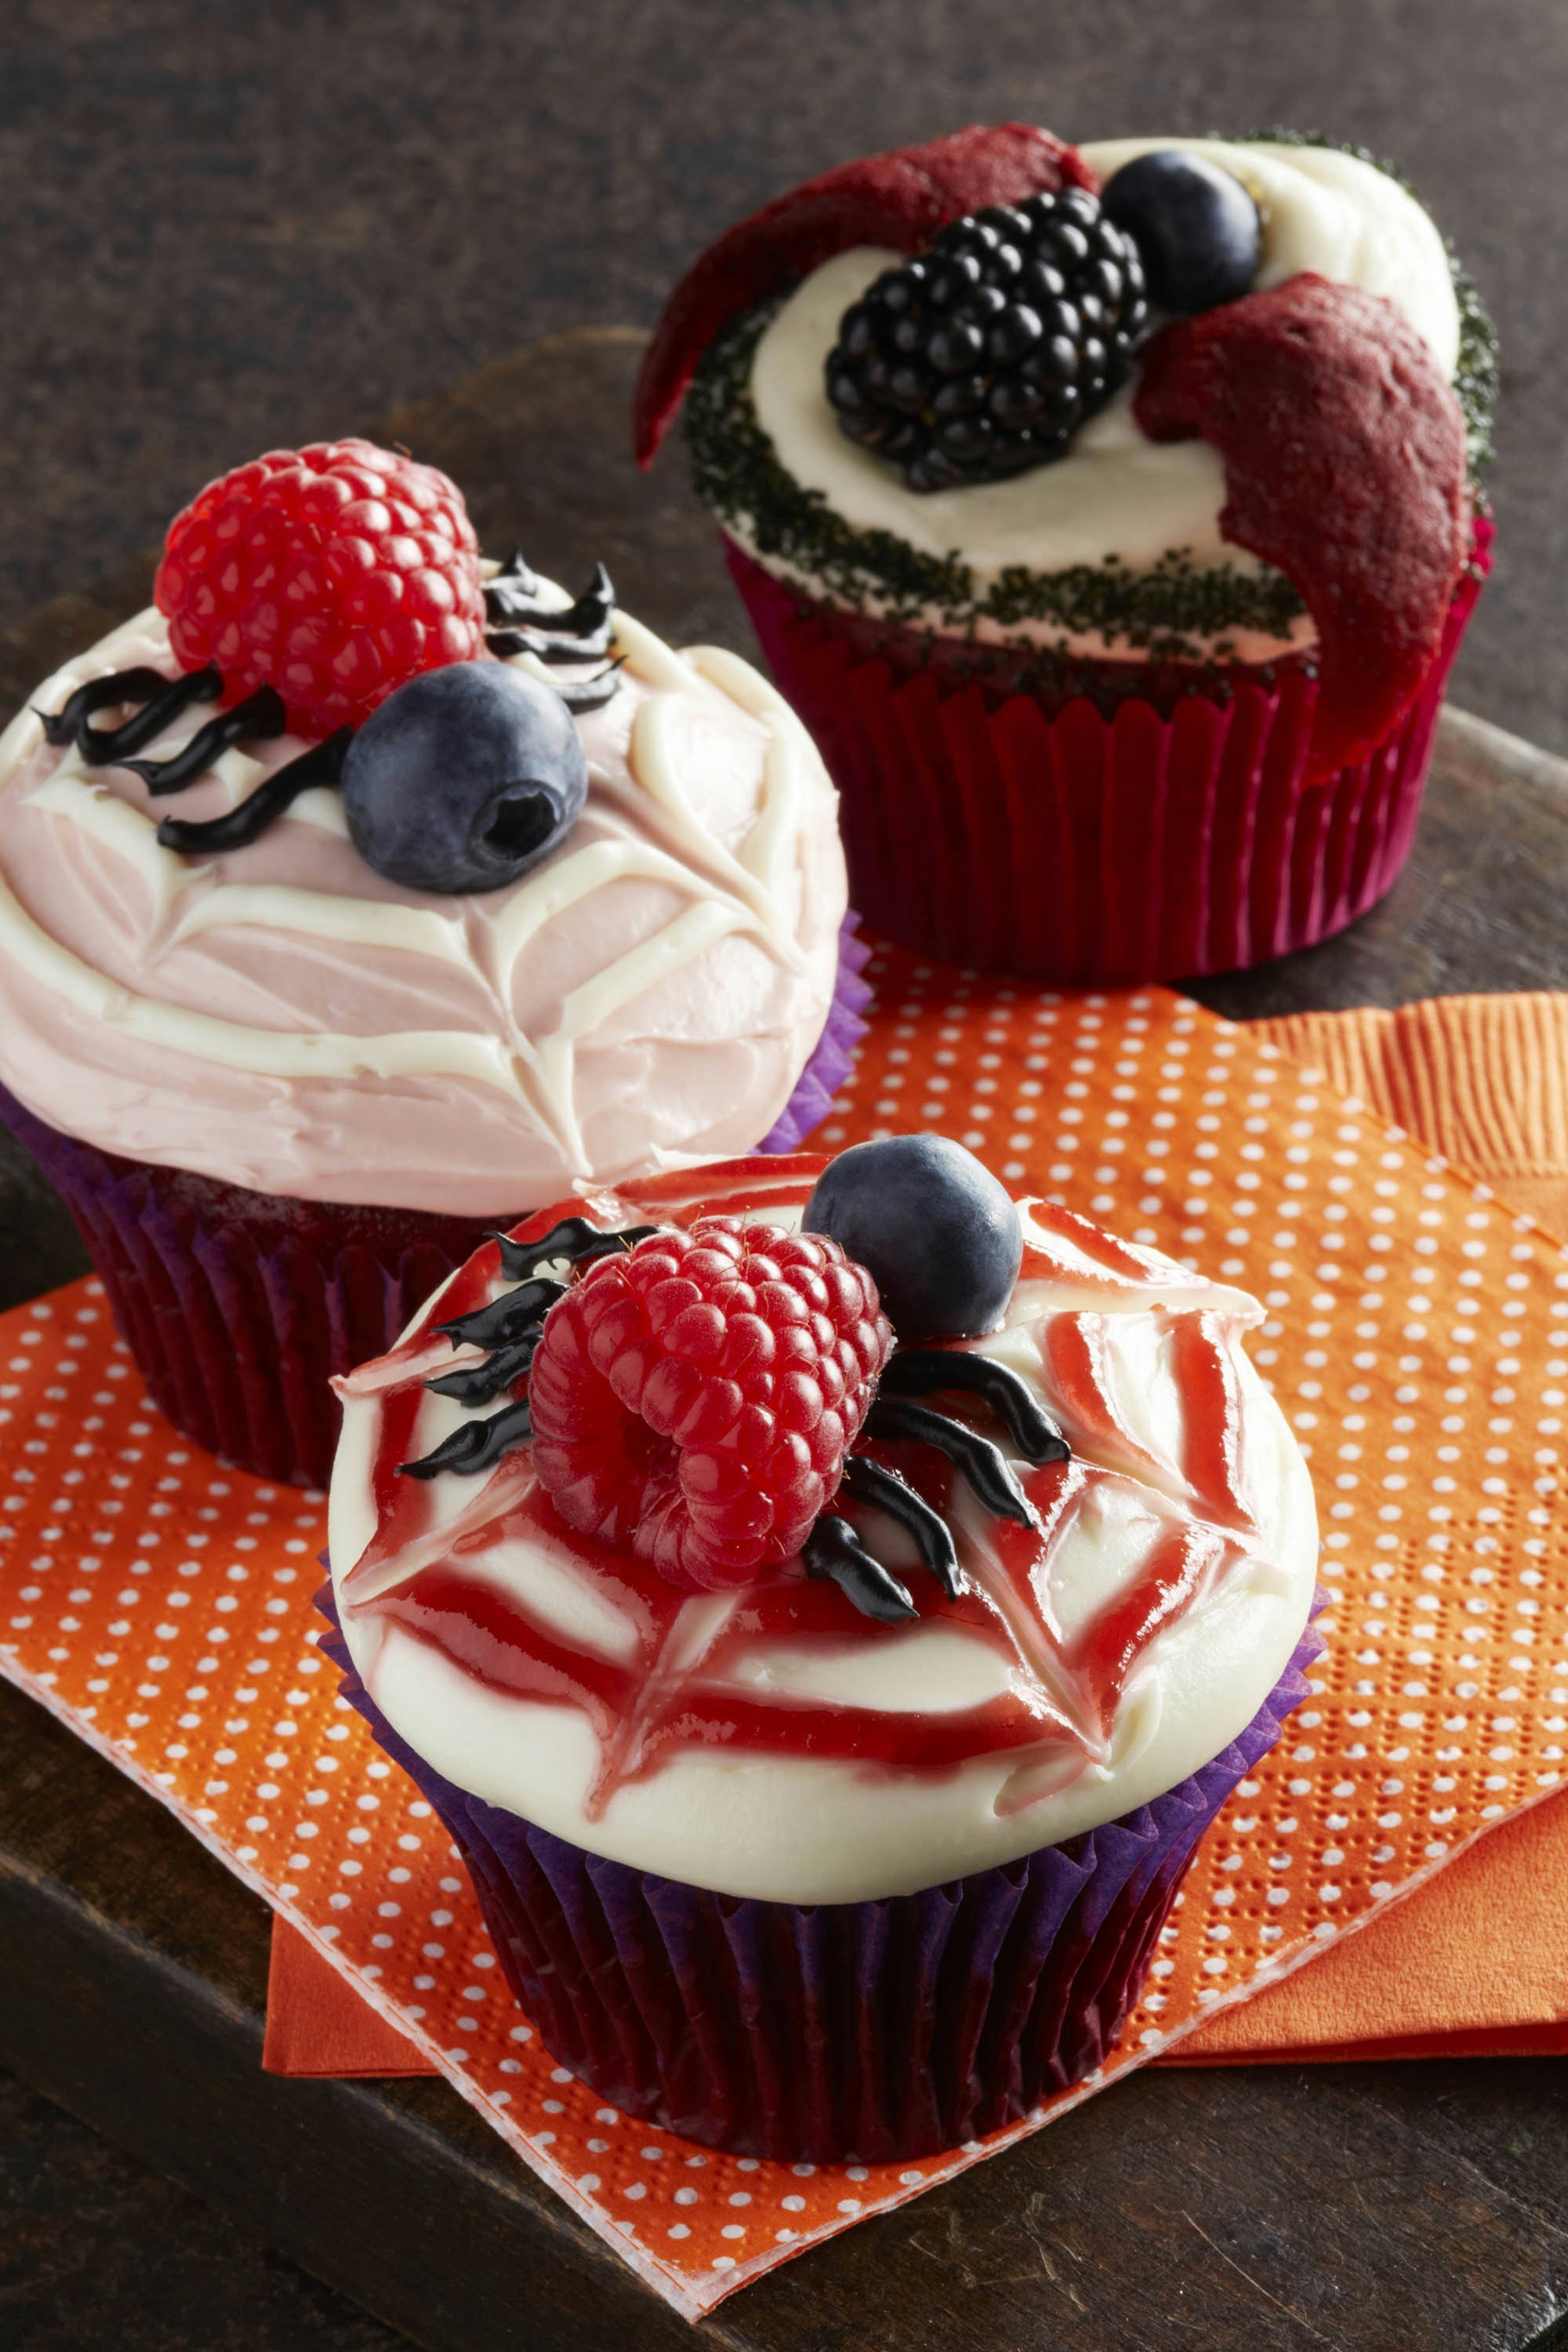 Three berry cupcakes decorated with a halloween theme and topped with berries